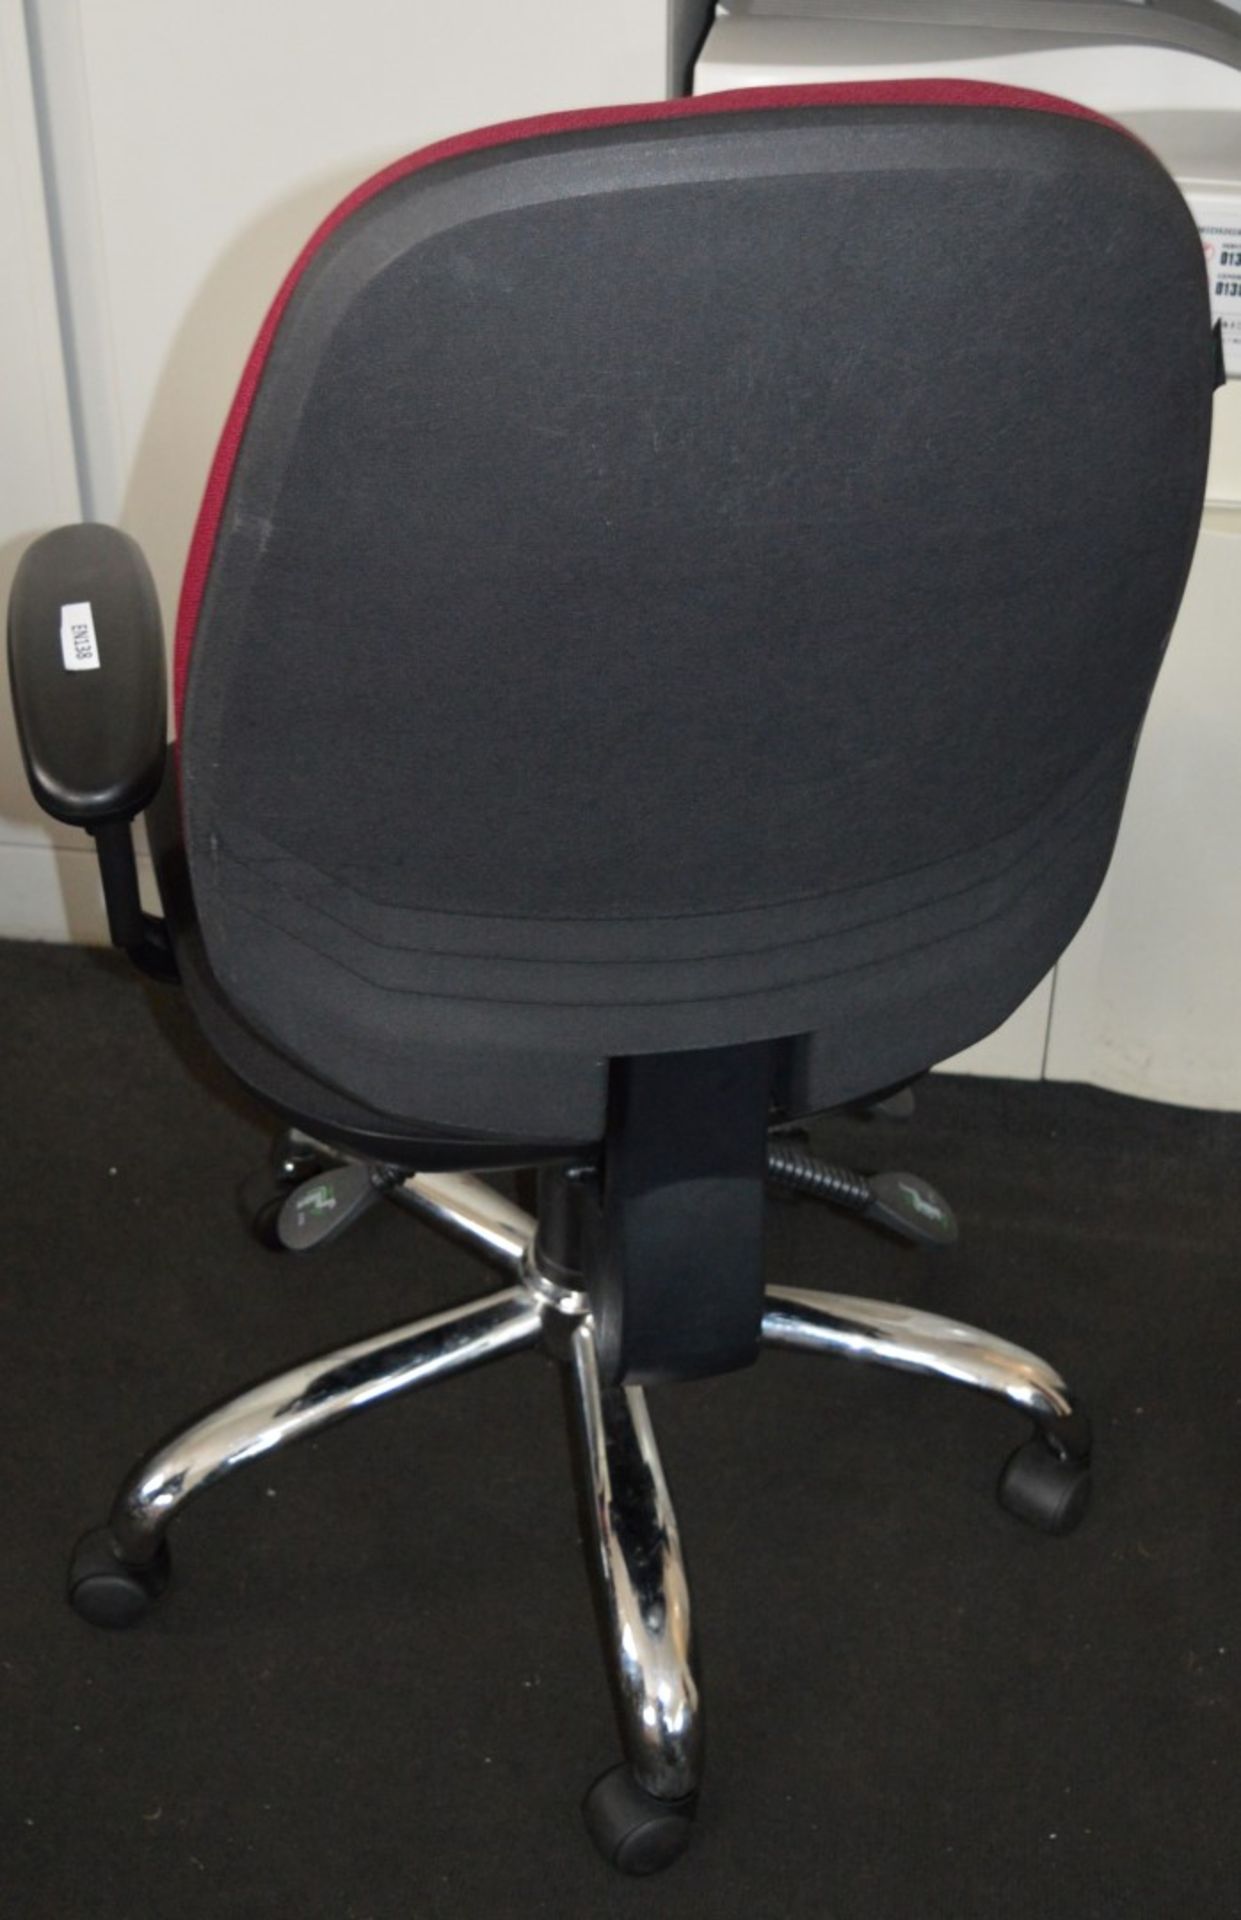 1 x Ergonomical Office Swivel Chair - Height and Tilt Adjustable - Hard Wearing Fabric With Chrome - Image 6 of 6